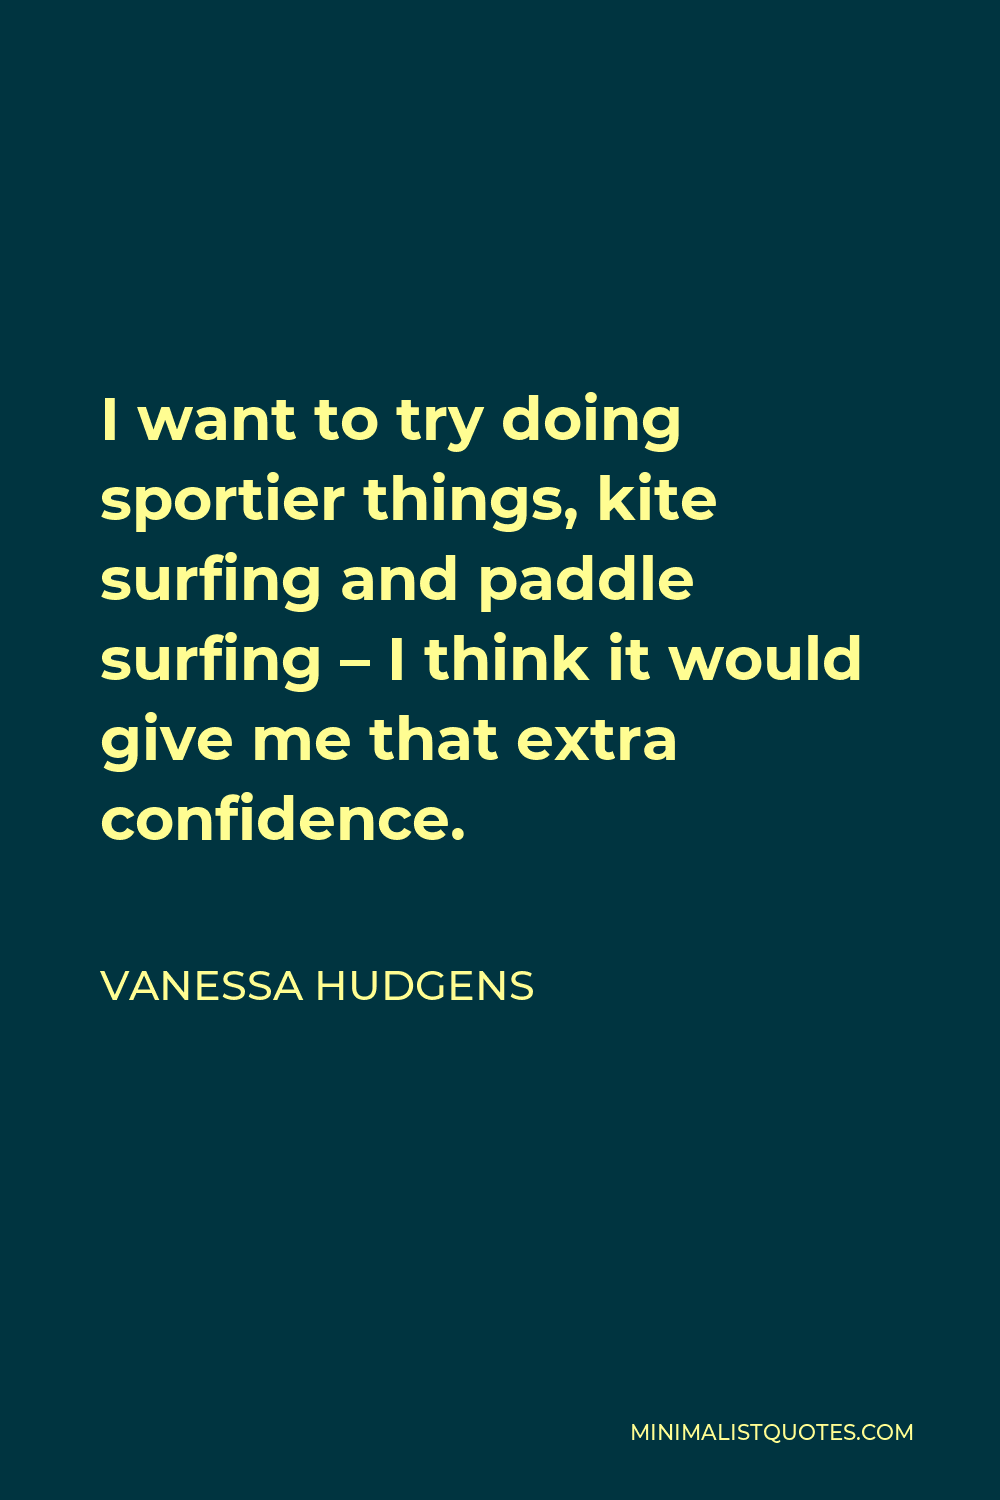 Vanessa Hudgens Quote - I want to try doing sportier things, kite surfing and paddle surfing – I think it would give me that extra confidence.